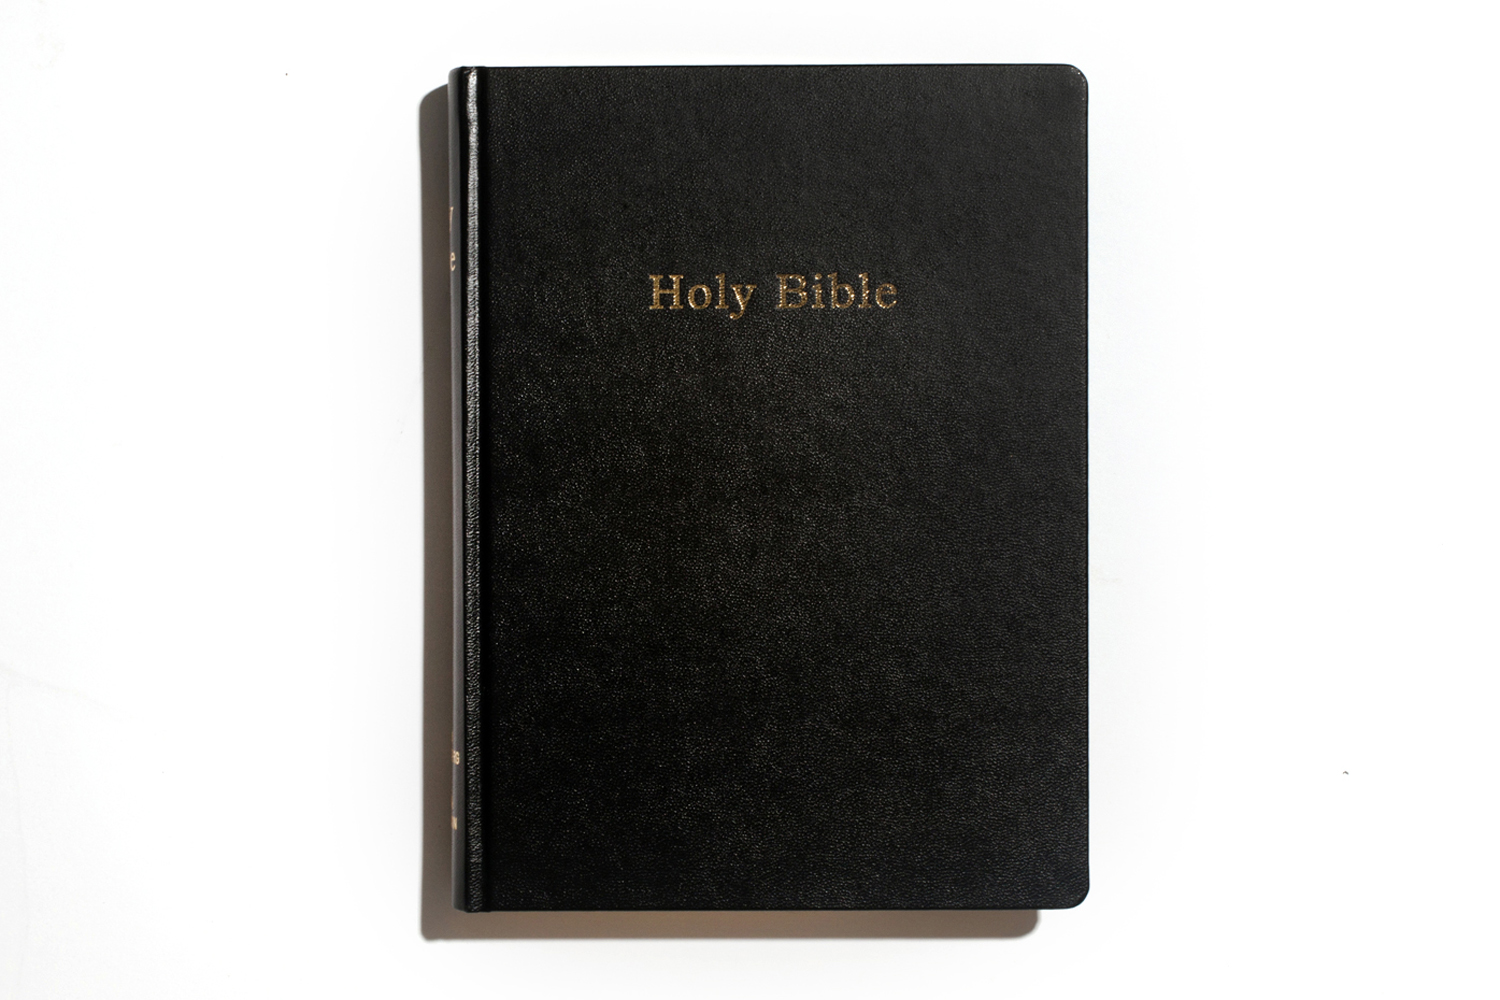 Holy Bible by Adam Broomberg &amp; Oliver Chanarin, published by MACK, selected by Roxana Morcoci, senior curator in the Department of Photography, Museum of Modern Art.